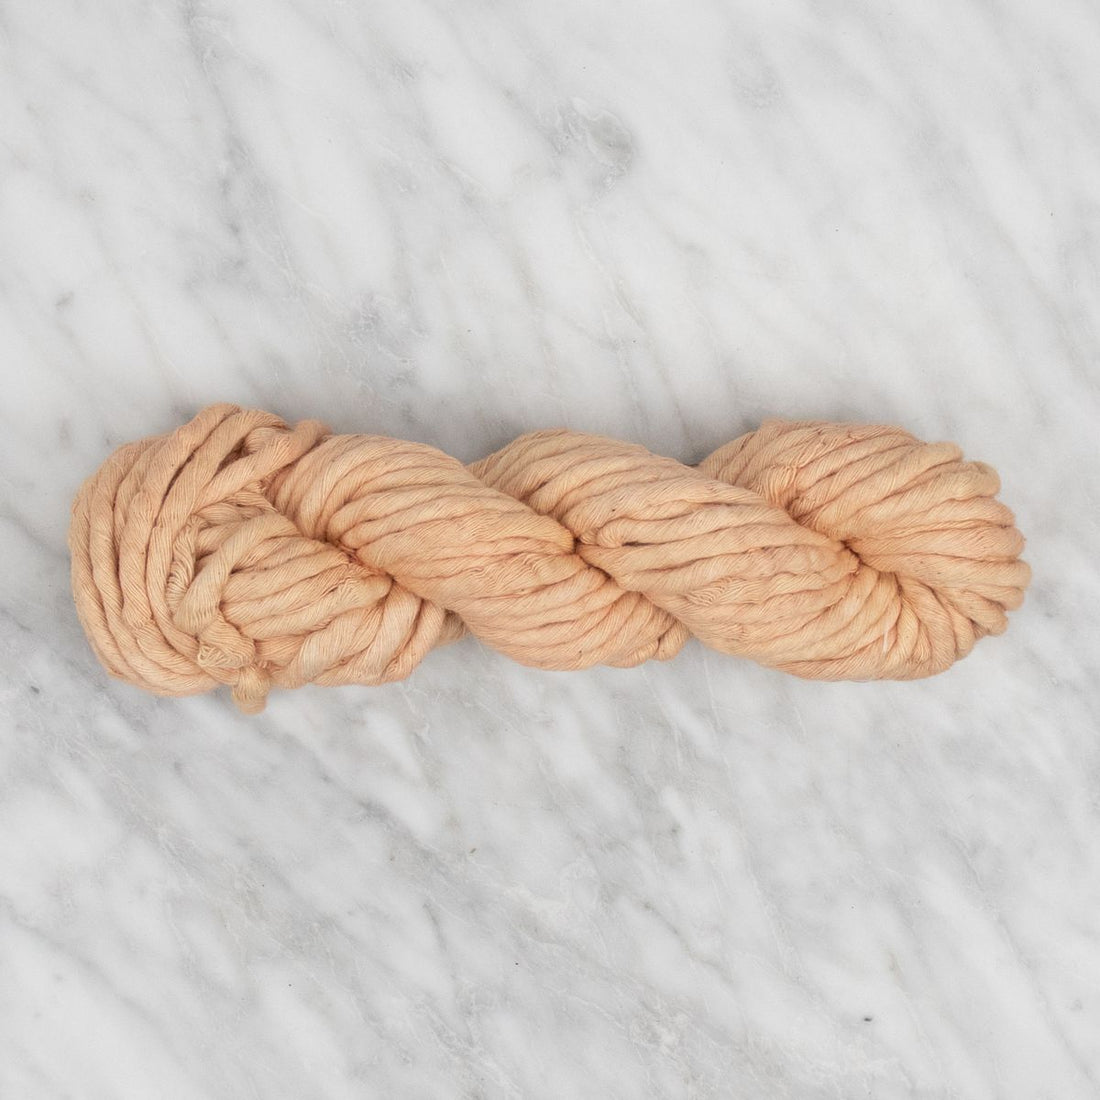 5mm Hand-Dyed Cotton String - Bisque - 100 grams